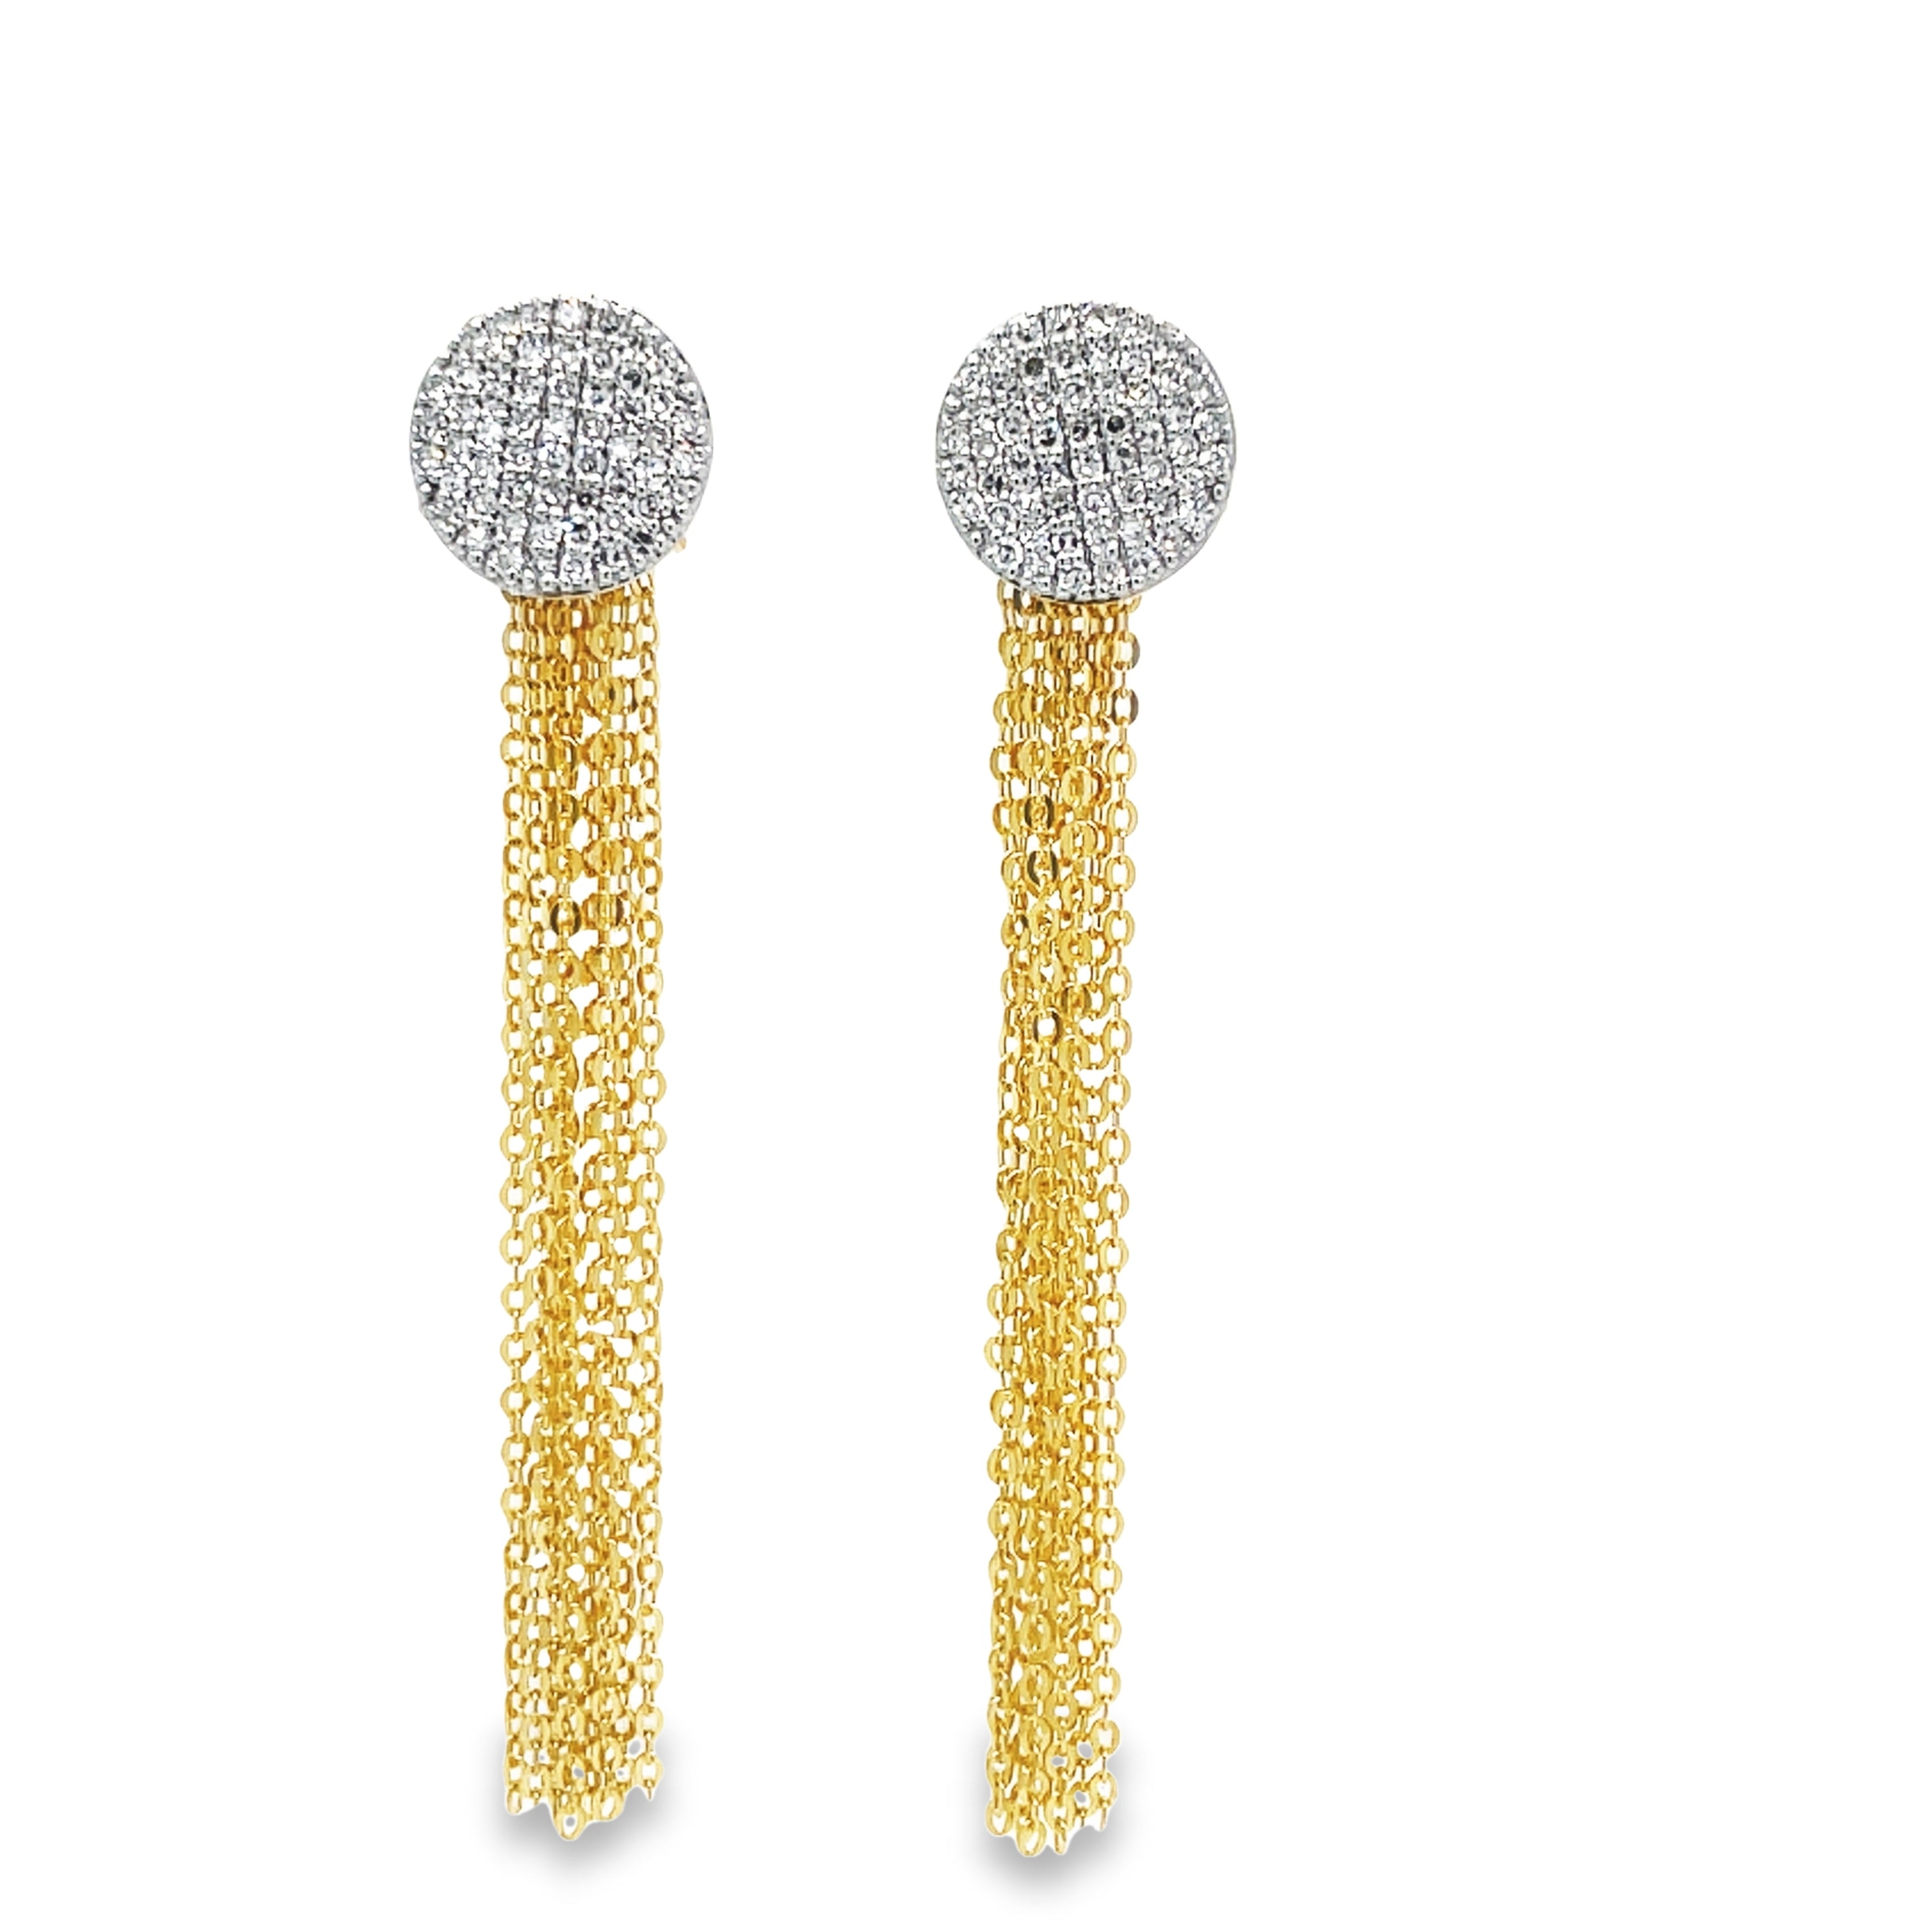 Indulge in luxury with our 18k Diamond Pave Disk with Long Diamond Cut Multi Chain Earrings. Crafted with 18k yellow gold, these stunning earrings feature a dazzling diamond pave disk and long multi chain drops. Elevate any outfit with elegance and sophistication.